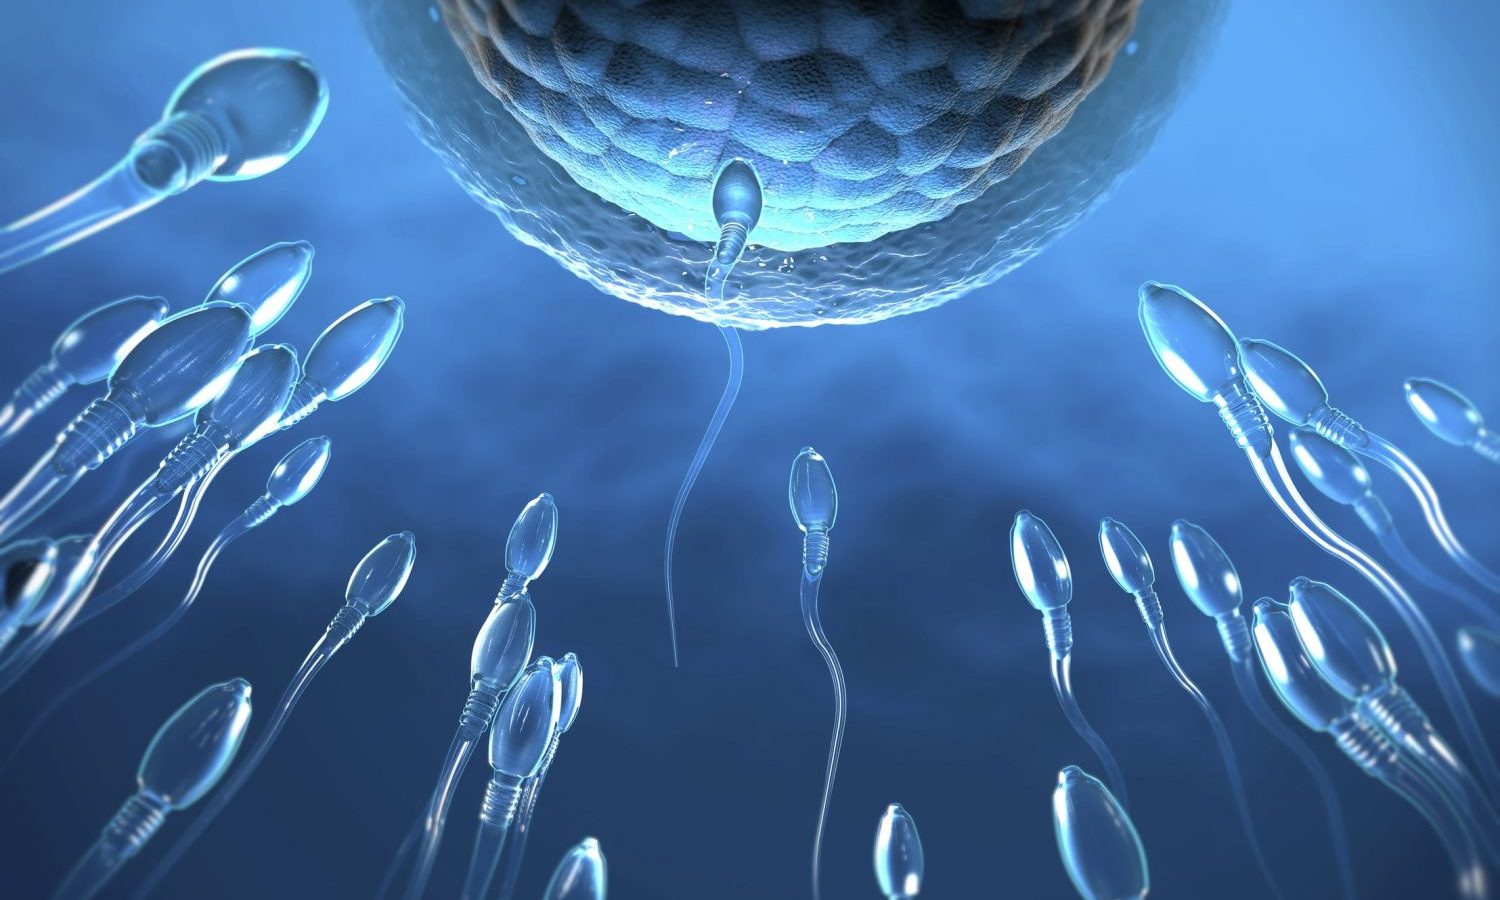 Does Using Cannabis Decrease Your Sperm Count?